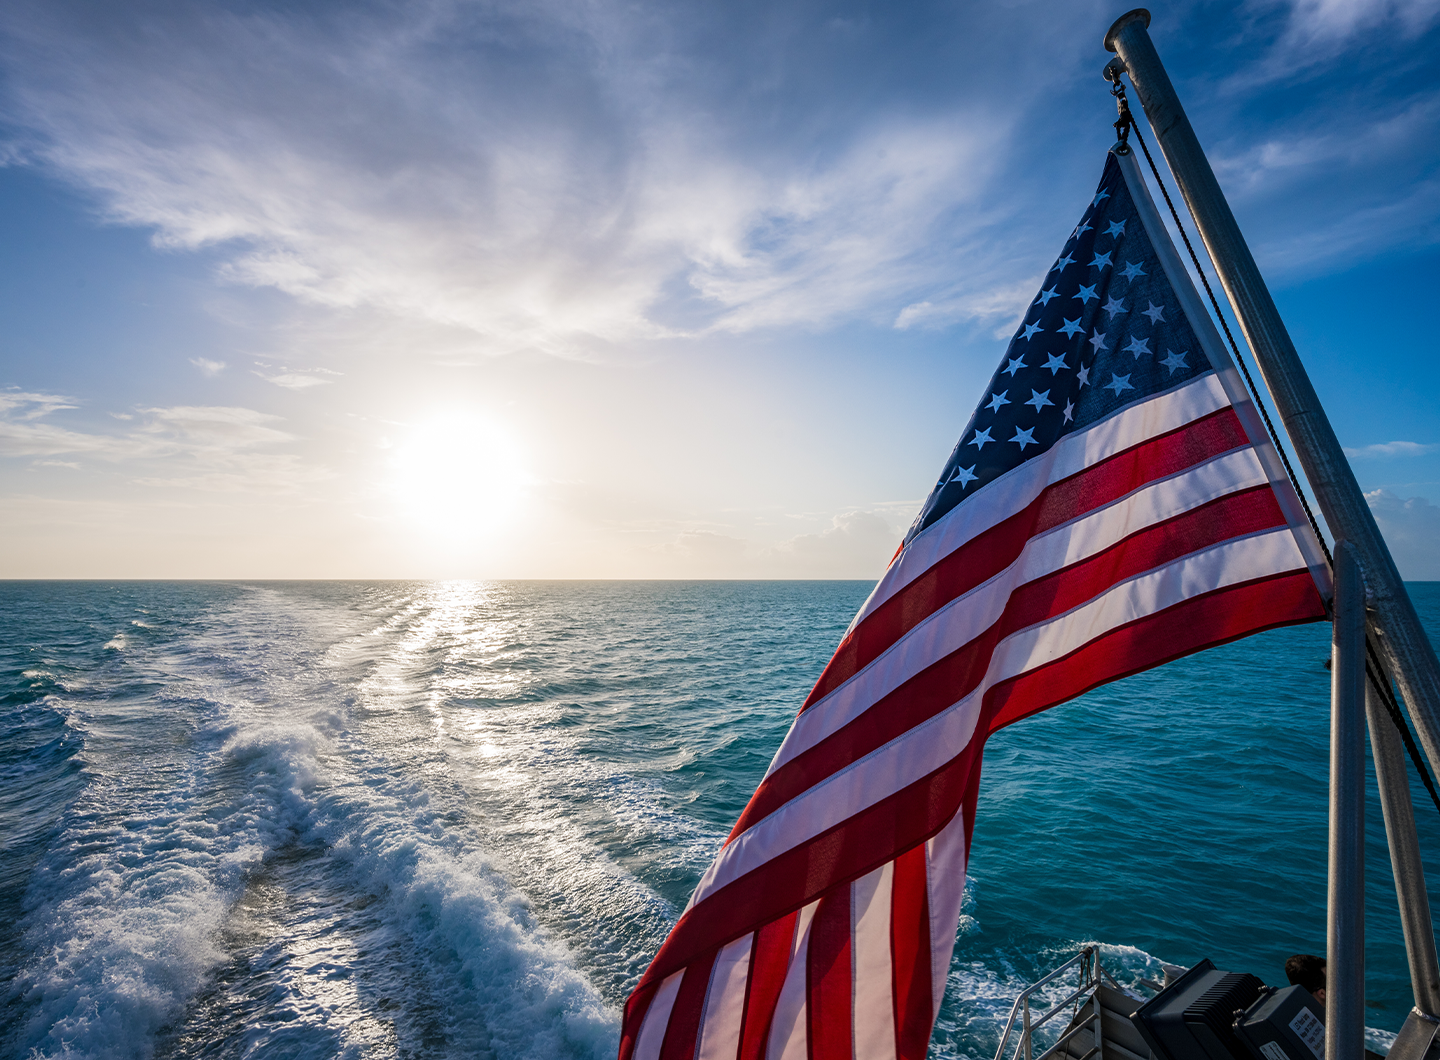 Flag waving over boat with ocean and sun